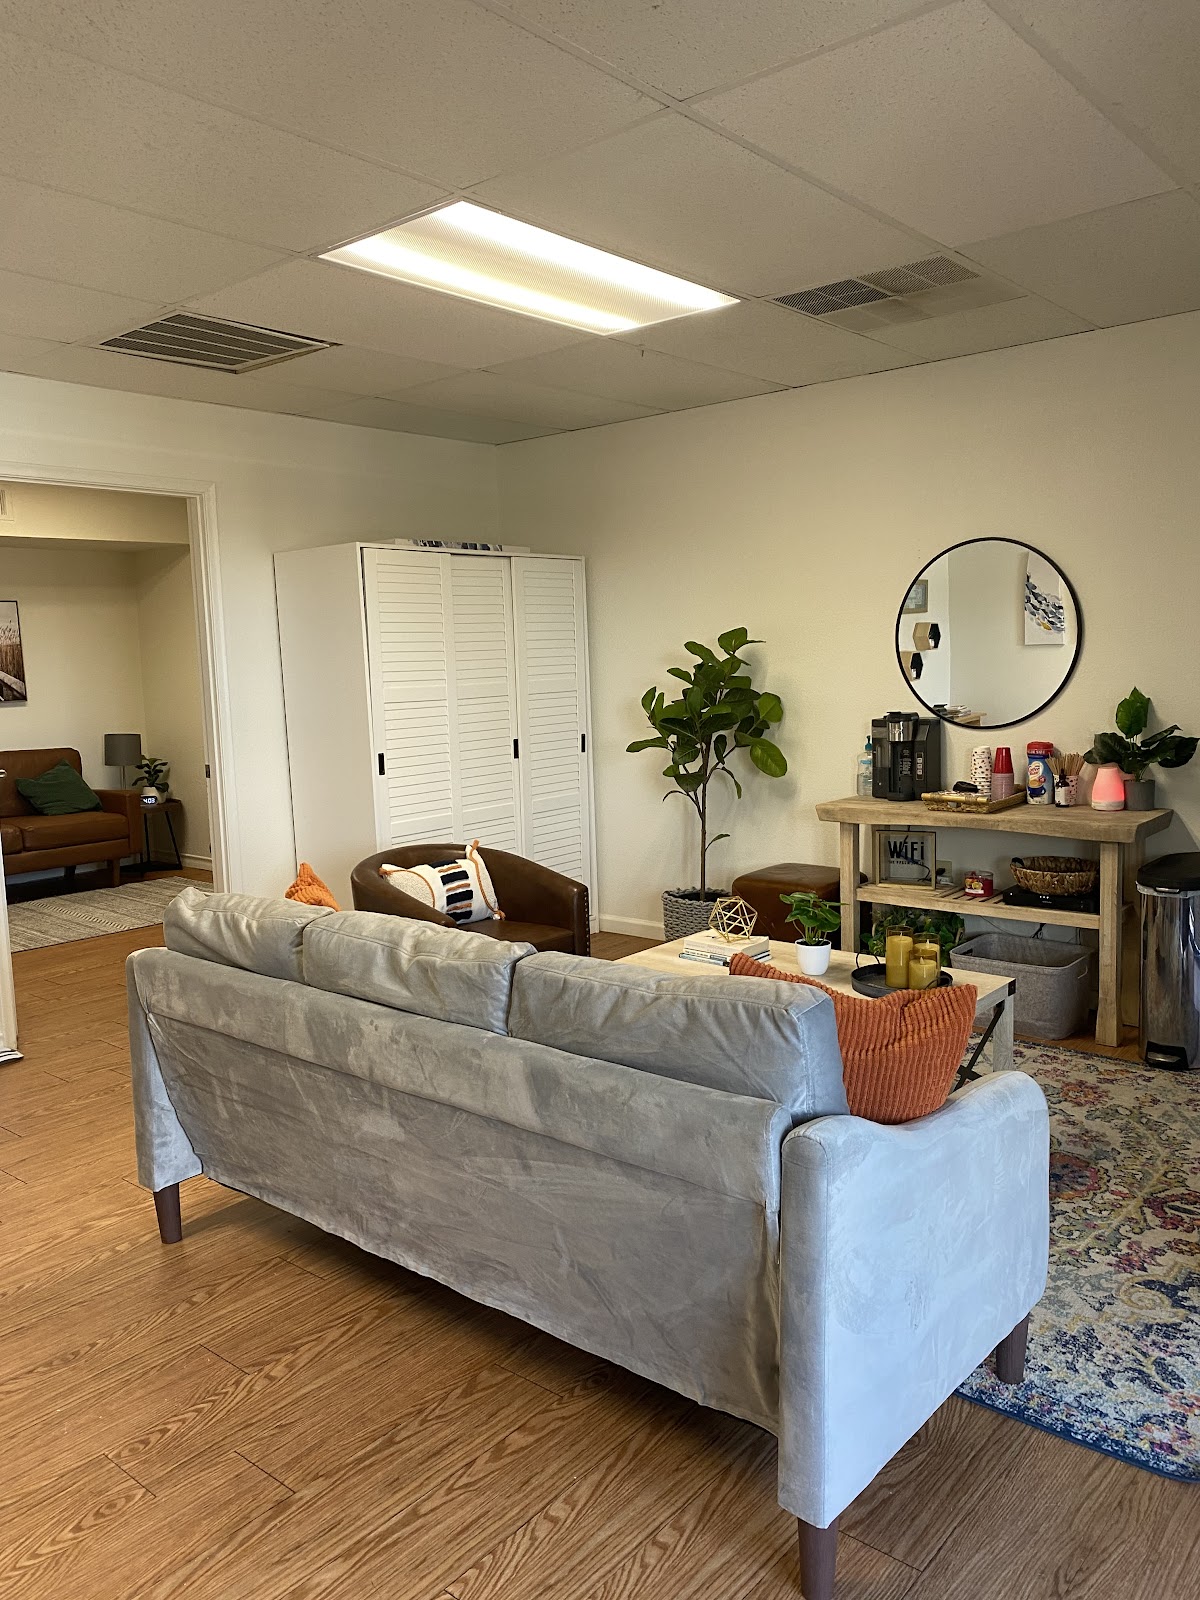 Uptown Phoenix Counseling reviews